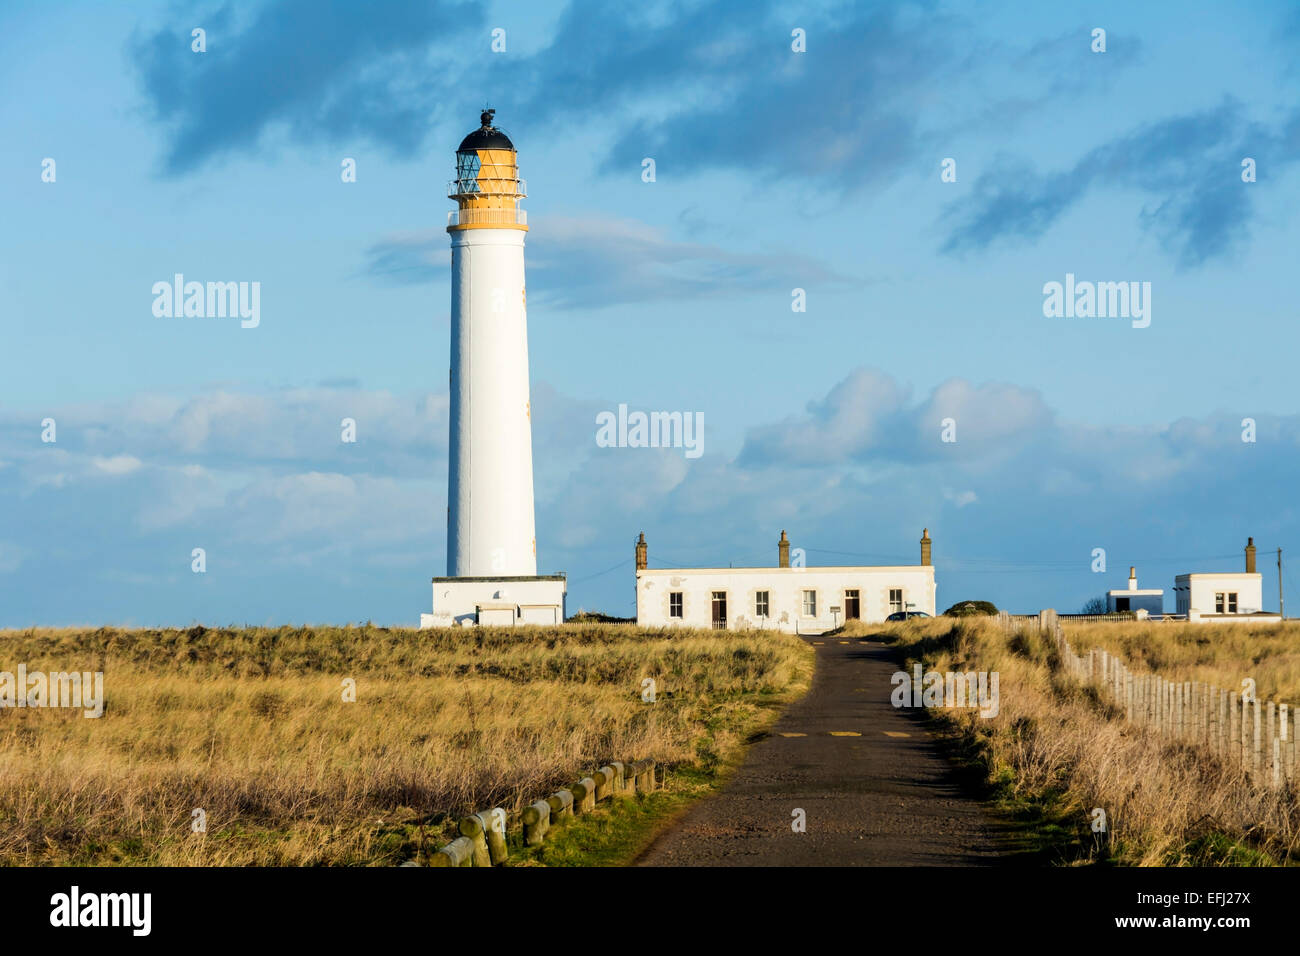 Barns Ness Lighthouse stands on the River Forth Estuary and is at the end of a winding, single track road near Torness nuclear power station. Stock Photo